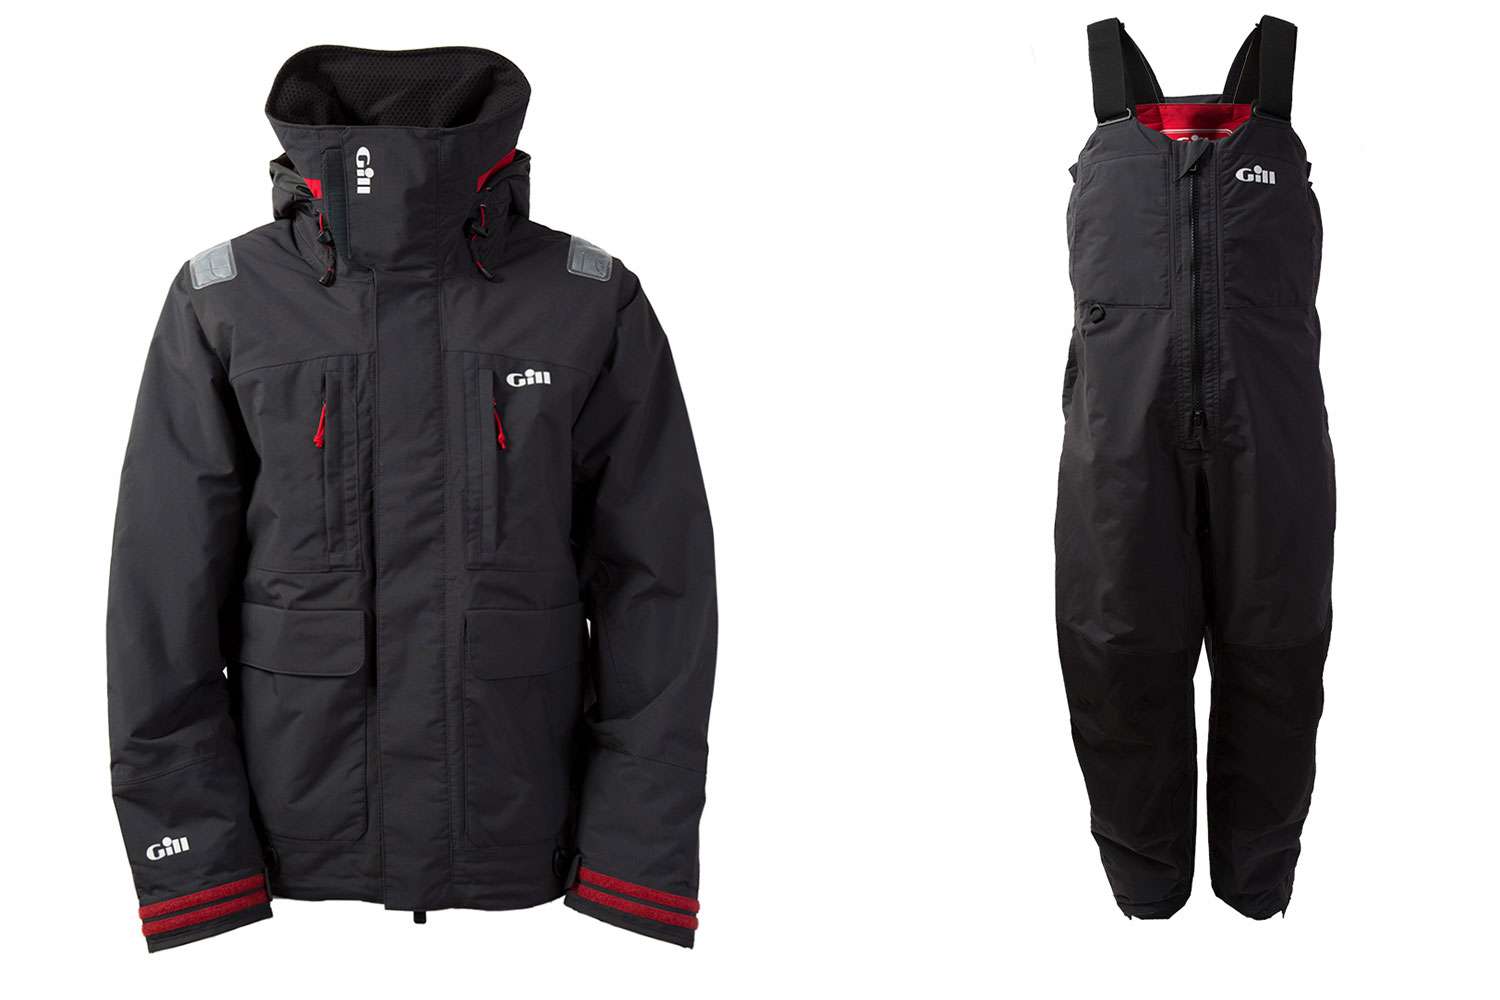 Gill FG25 Insulated Tournament Jacket, $325, and Gill FG25 Insulated Tournament Trousers, $279